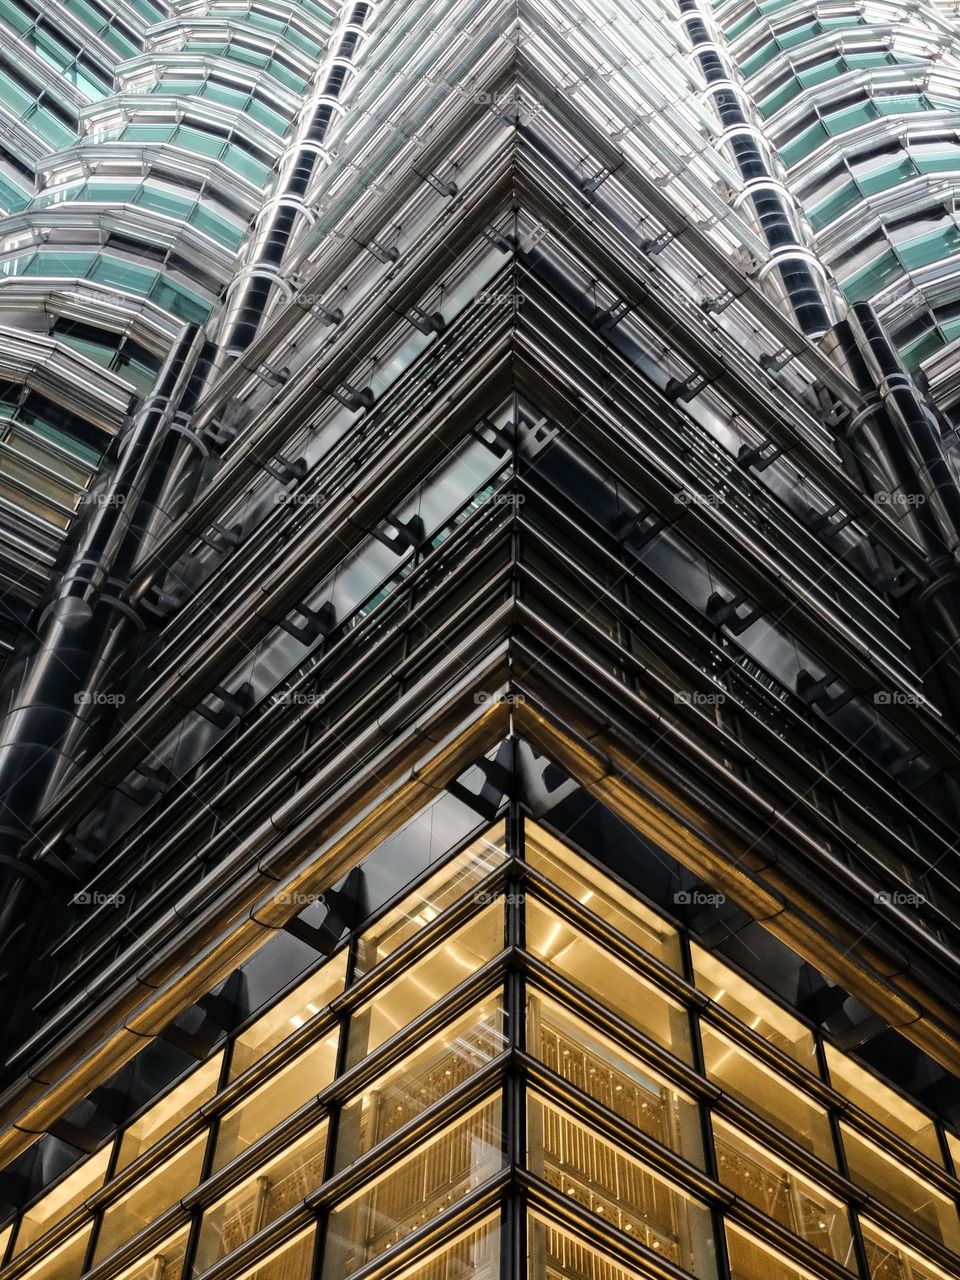 Details of steelwork at the Petronas Towers at night